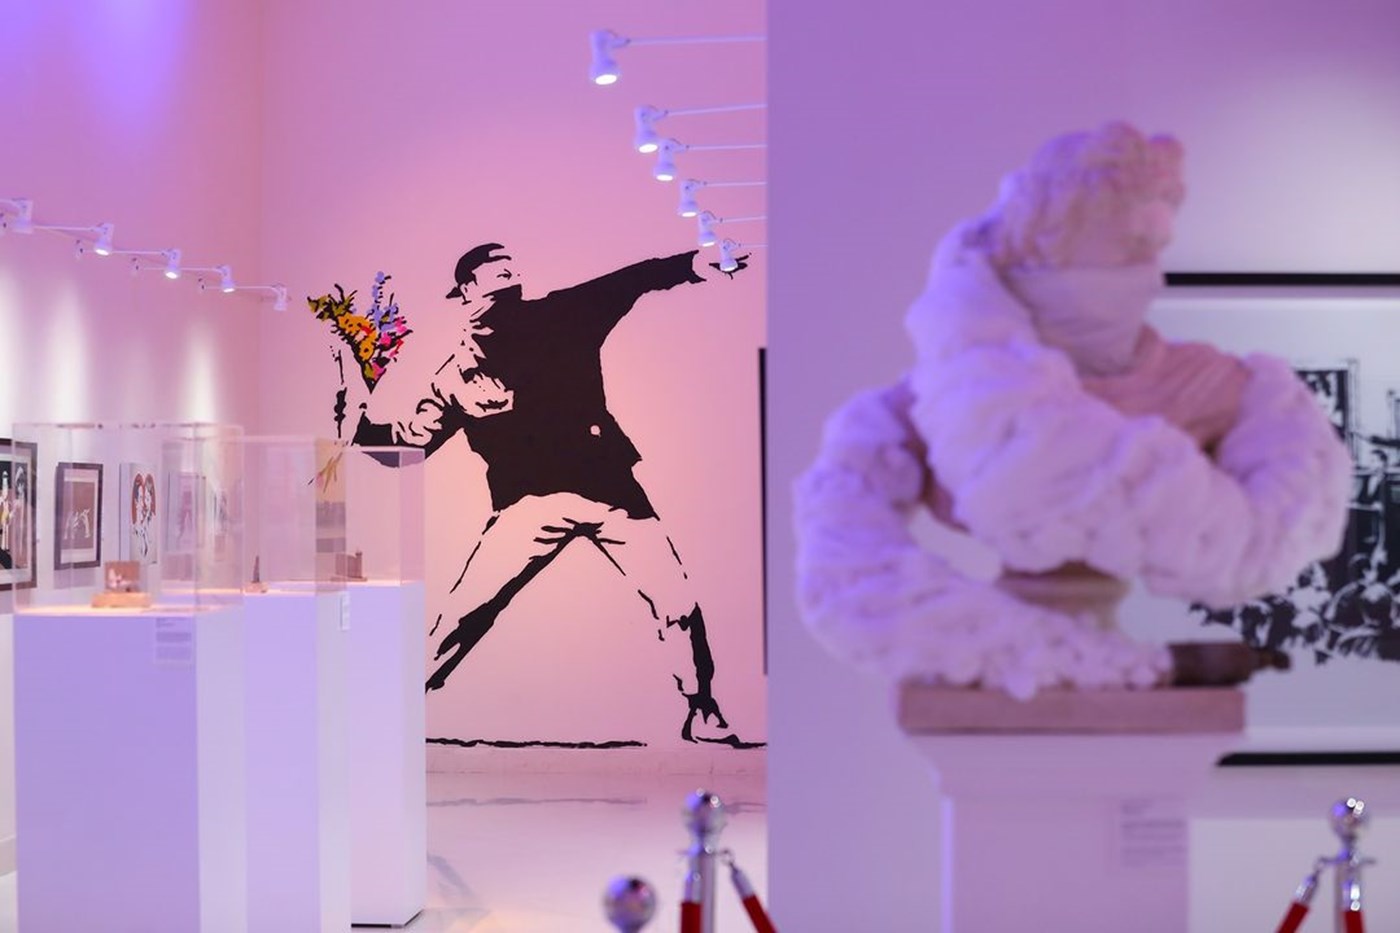 A snap from the Art of Banksy exhibit featuring pink lighting and stencilled wall art 